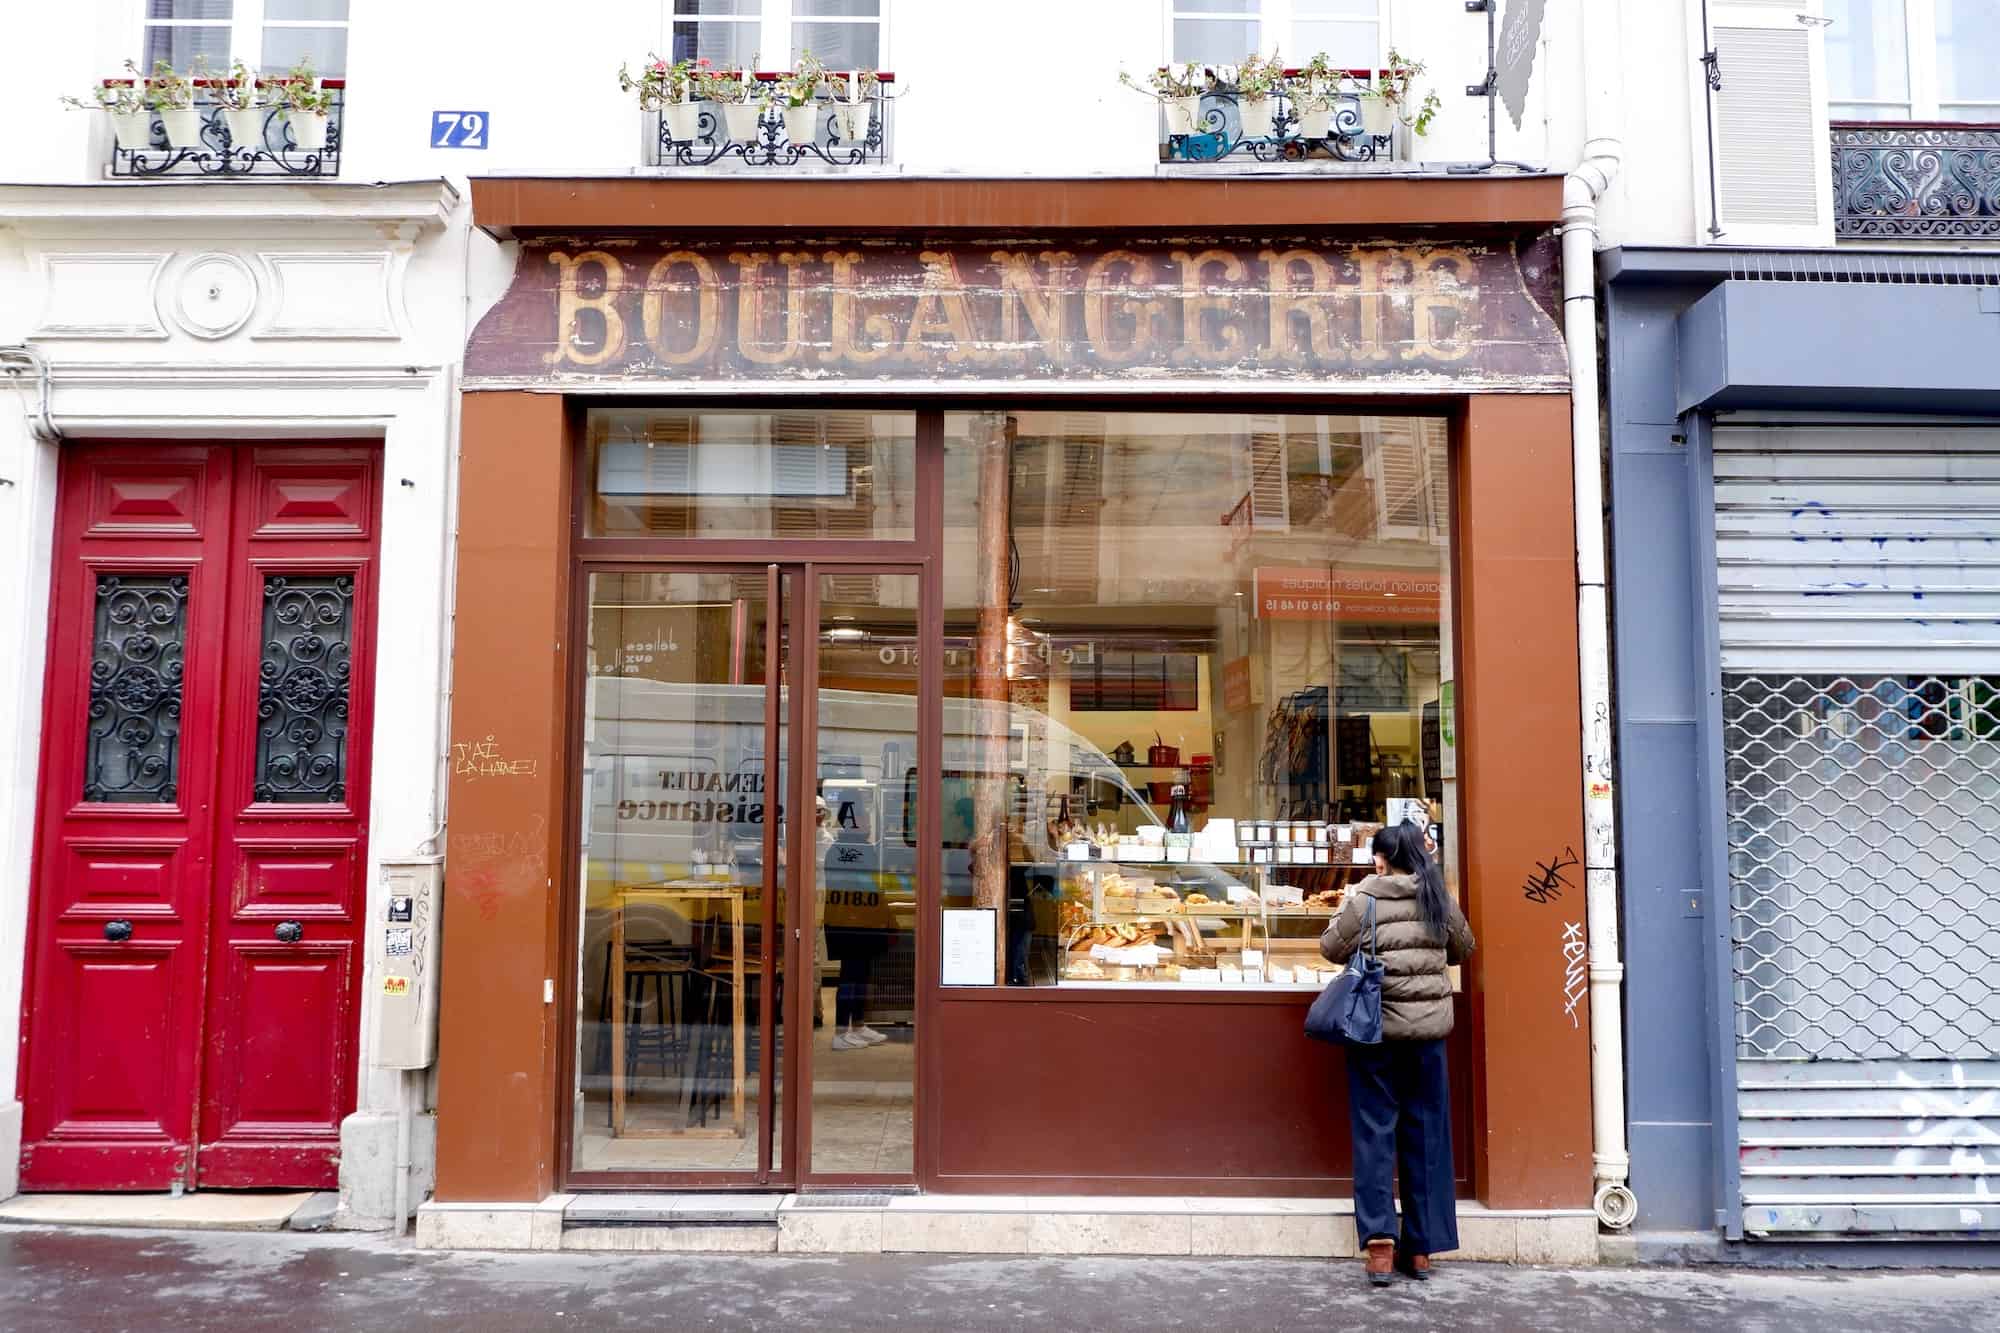 The facade of a boulangerie. There is a vintage sign above the windows. A woman is looking in the windows at the pastries on display.